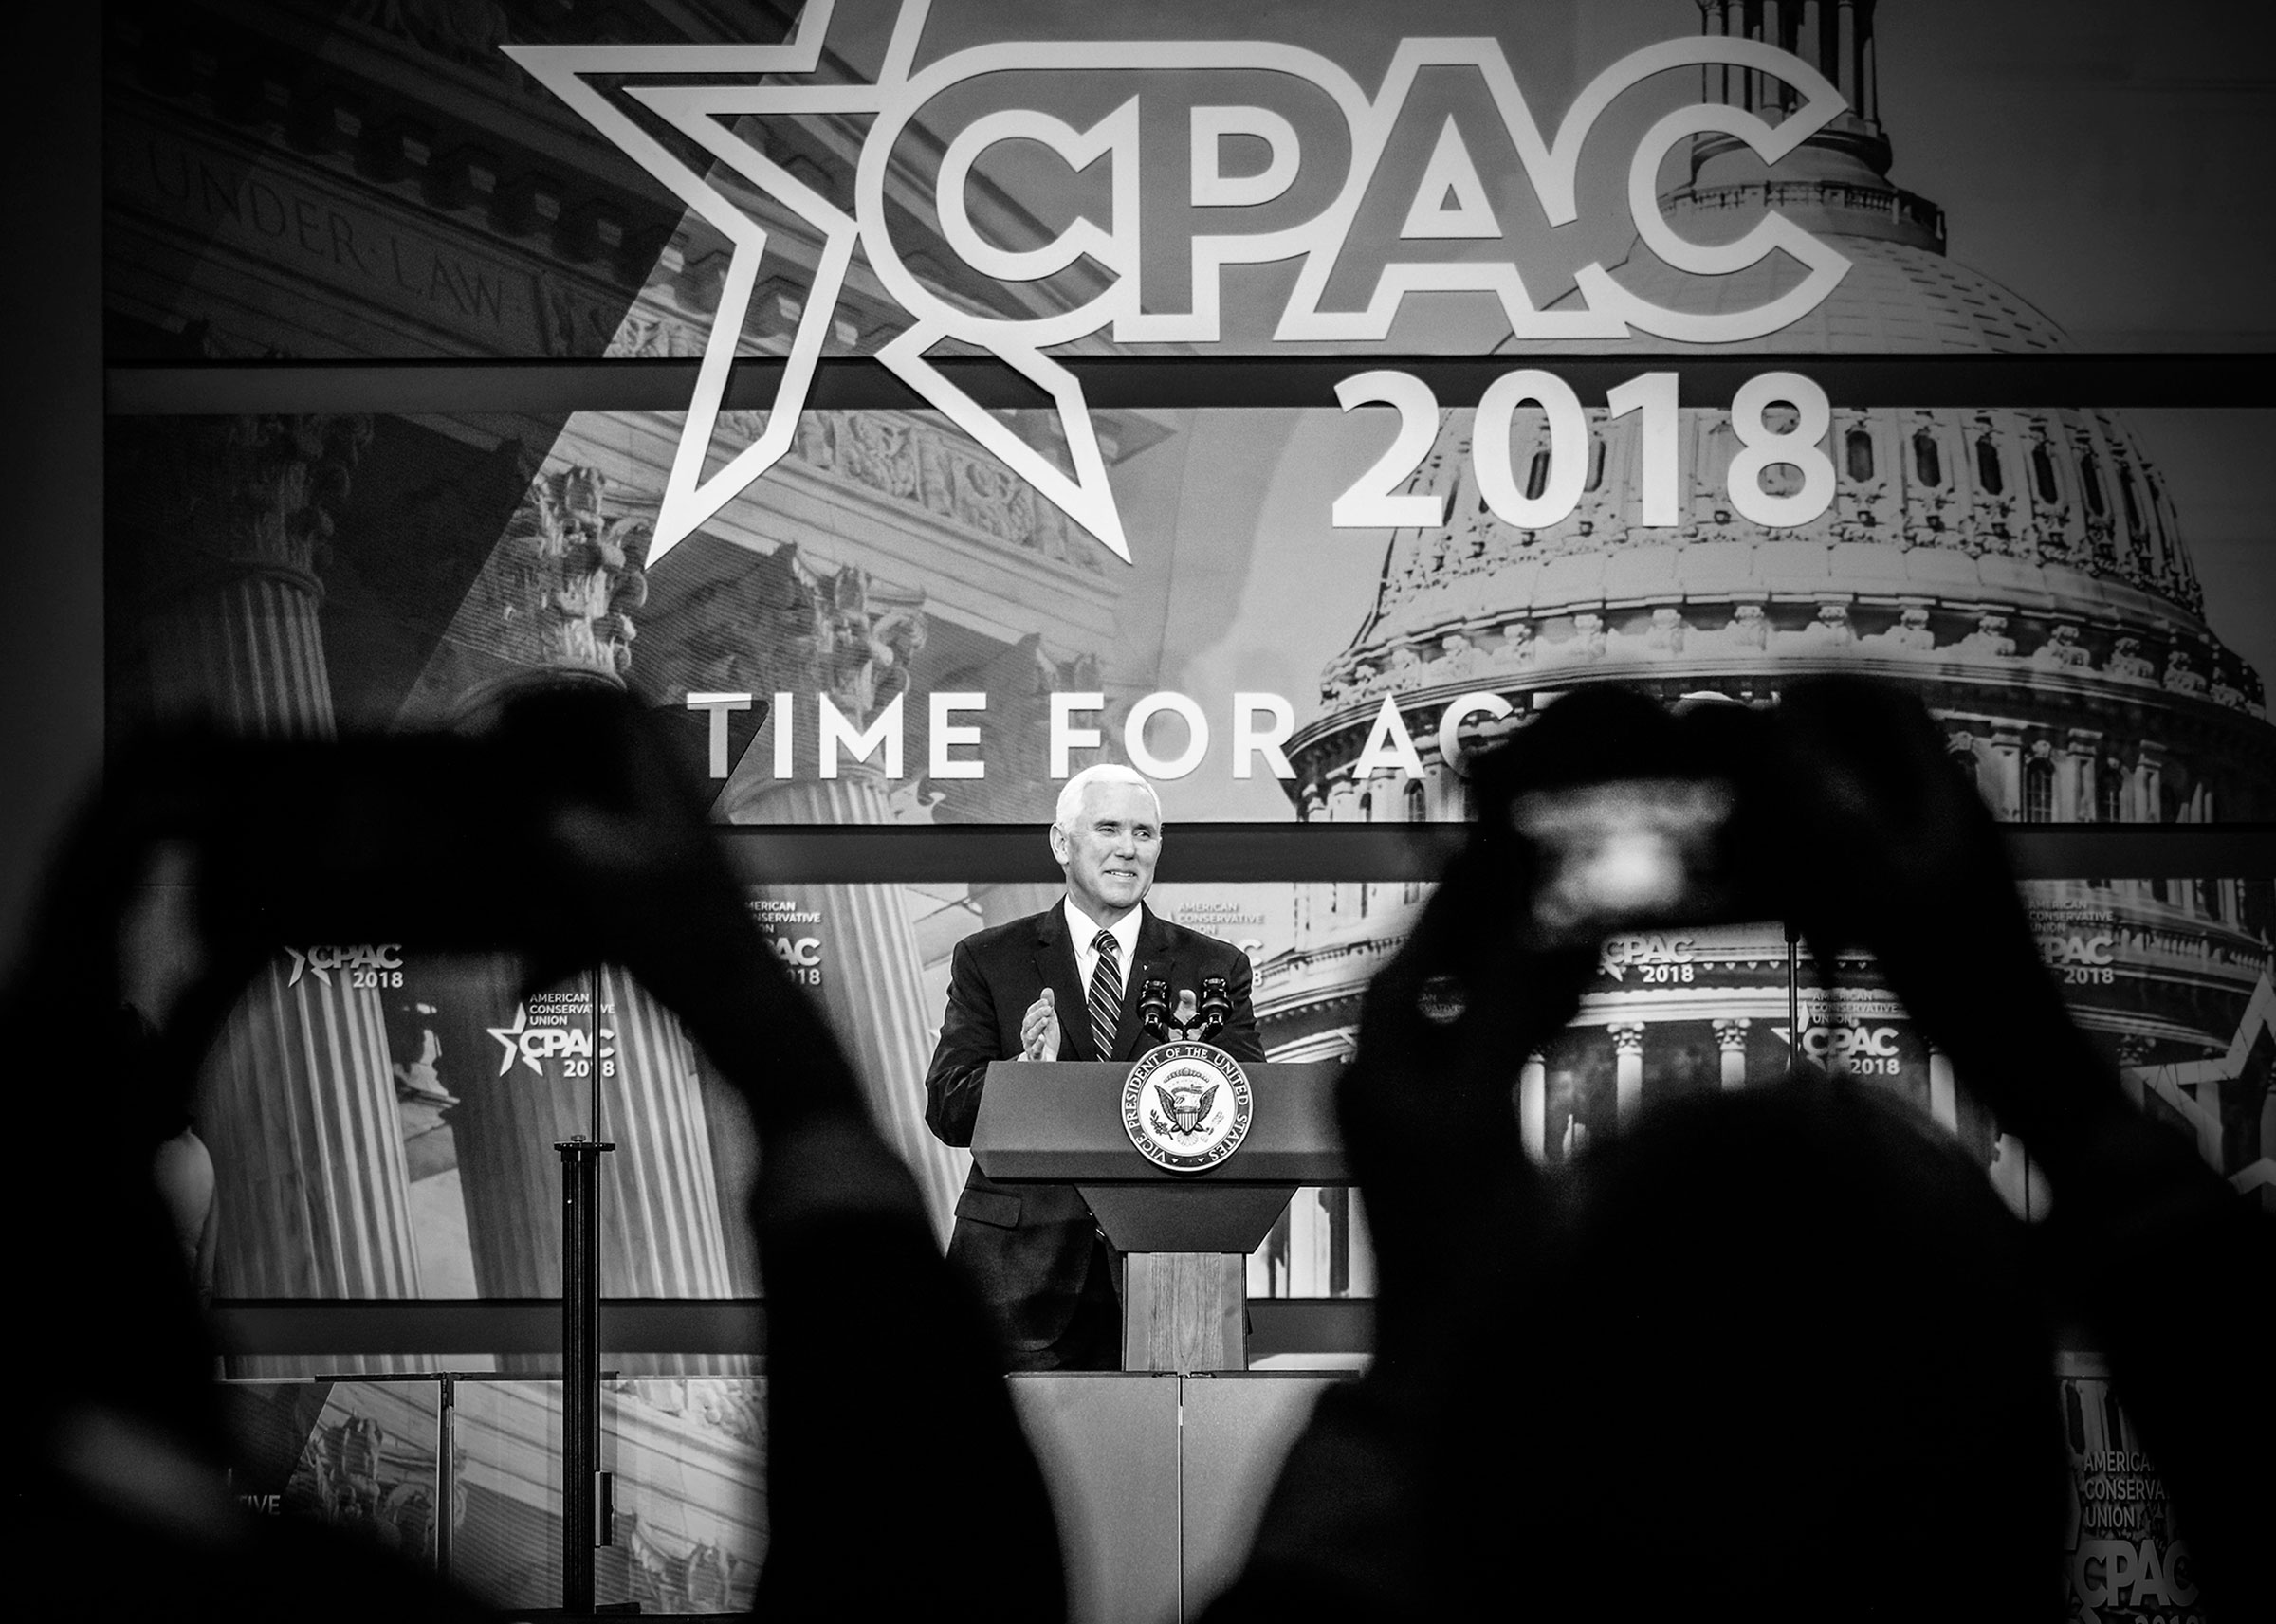 Vice President Mike Pence speaks at the Conservative Political Action Conference (CPAC) in Maryland, February 24, 2018. (Mark Peterson—Redux for TIME)